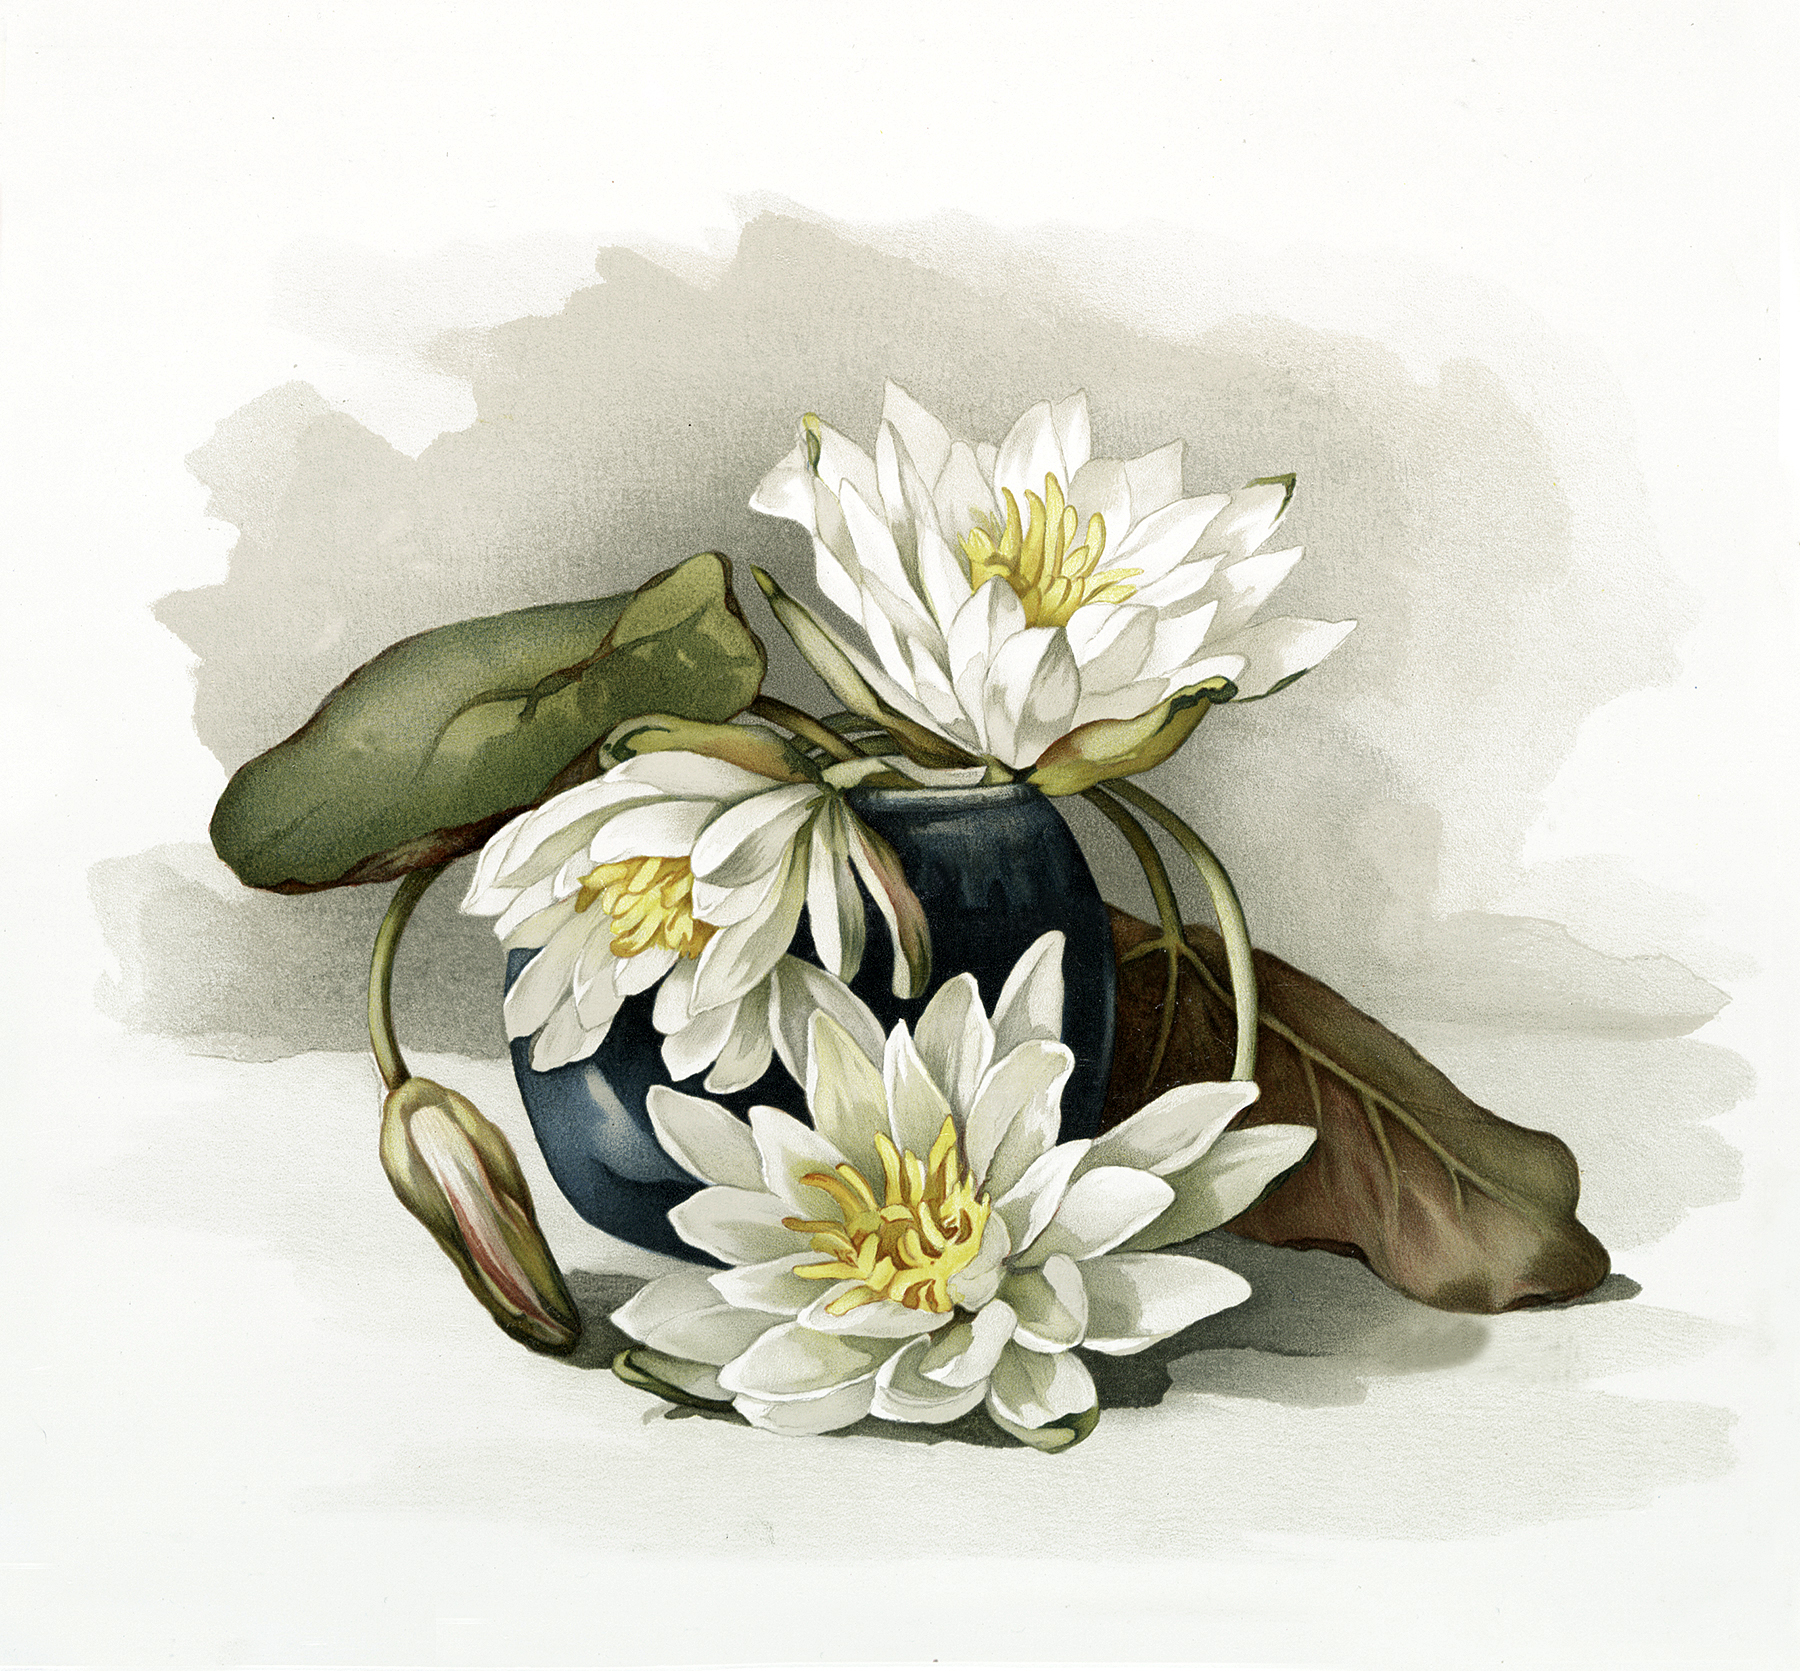 water lily flower clip art